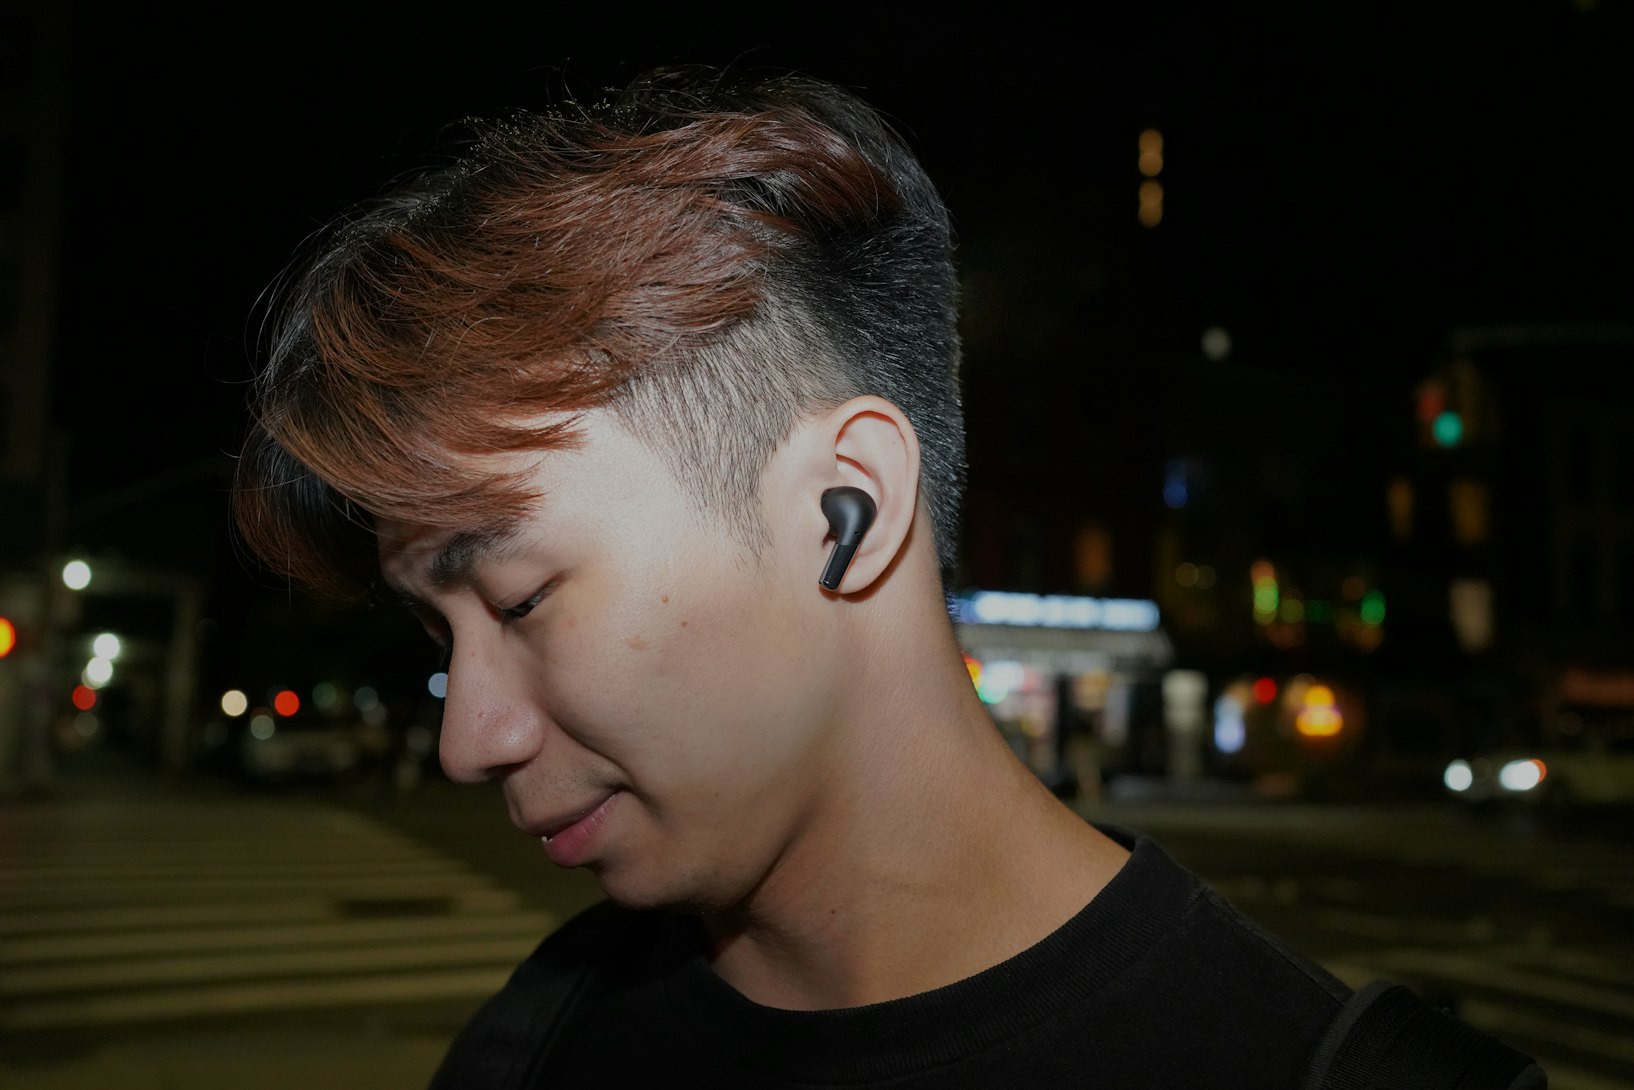 OnePlus Buds Pro review: An affordable ANC headset